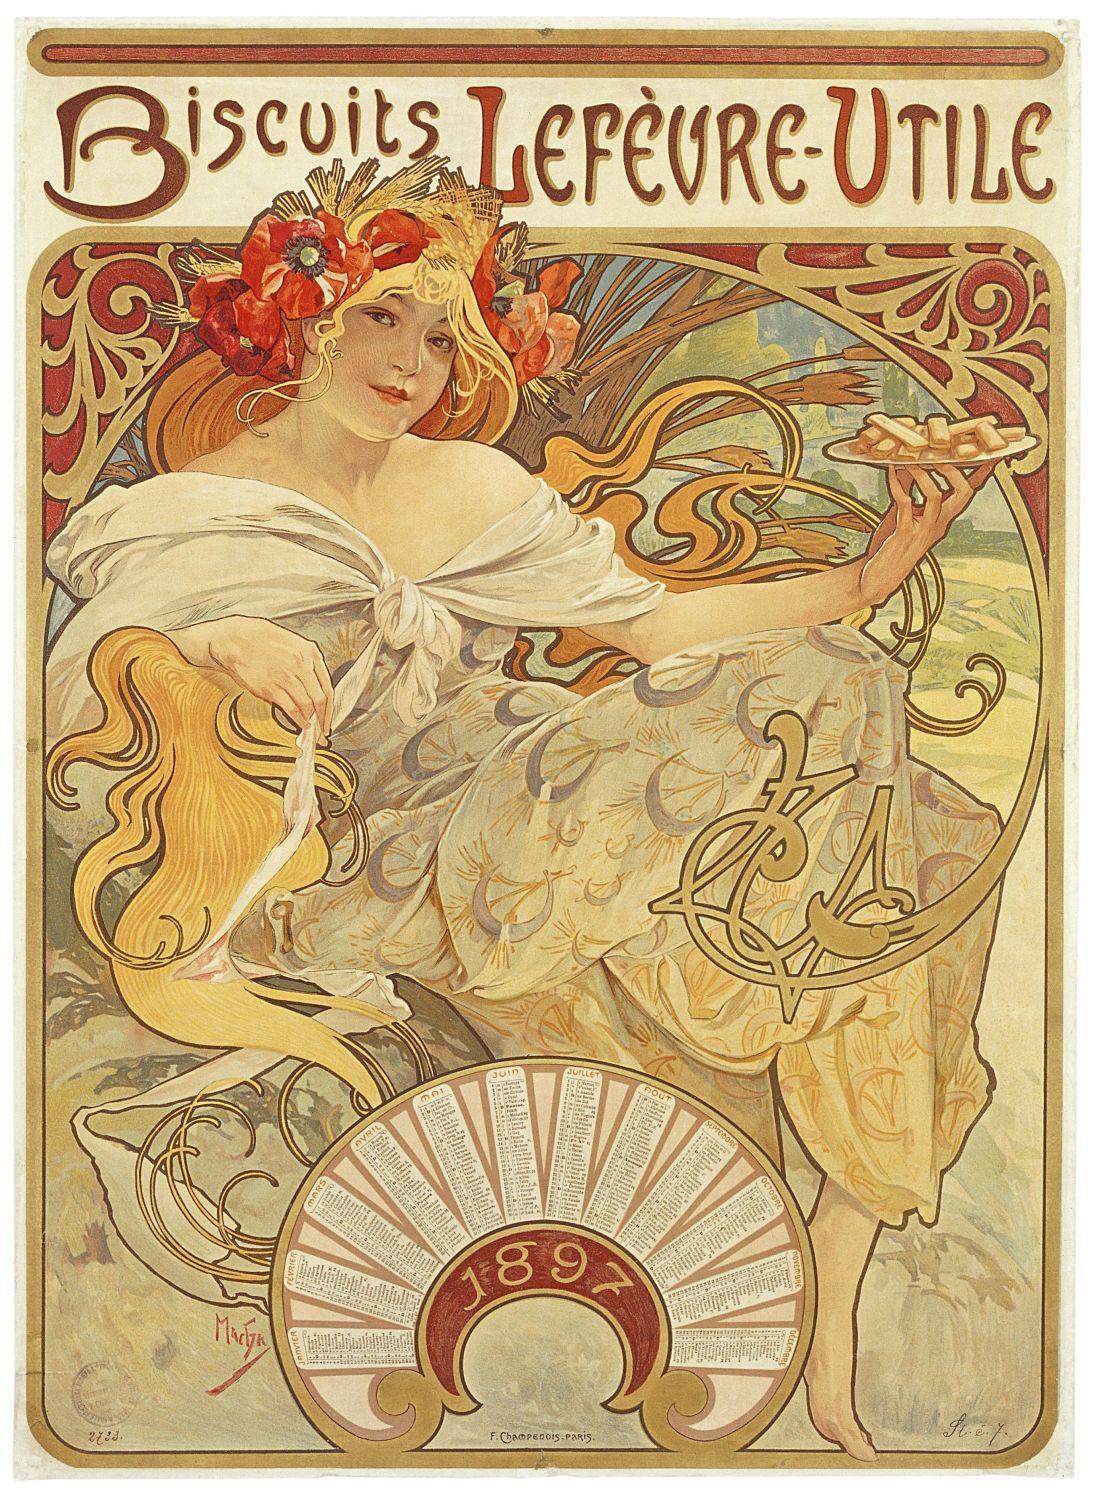 Alphonse Mucha, Biscuits Lefèvre-Utile, 1896, private collection.